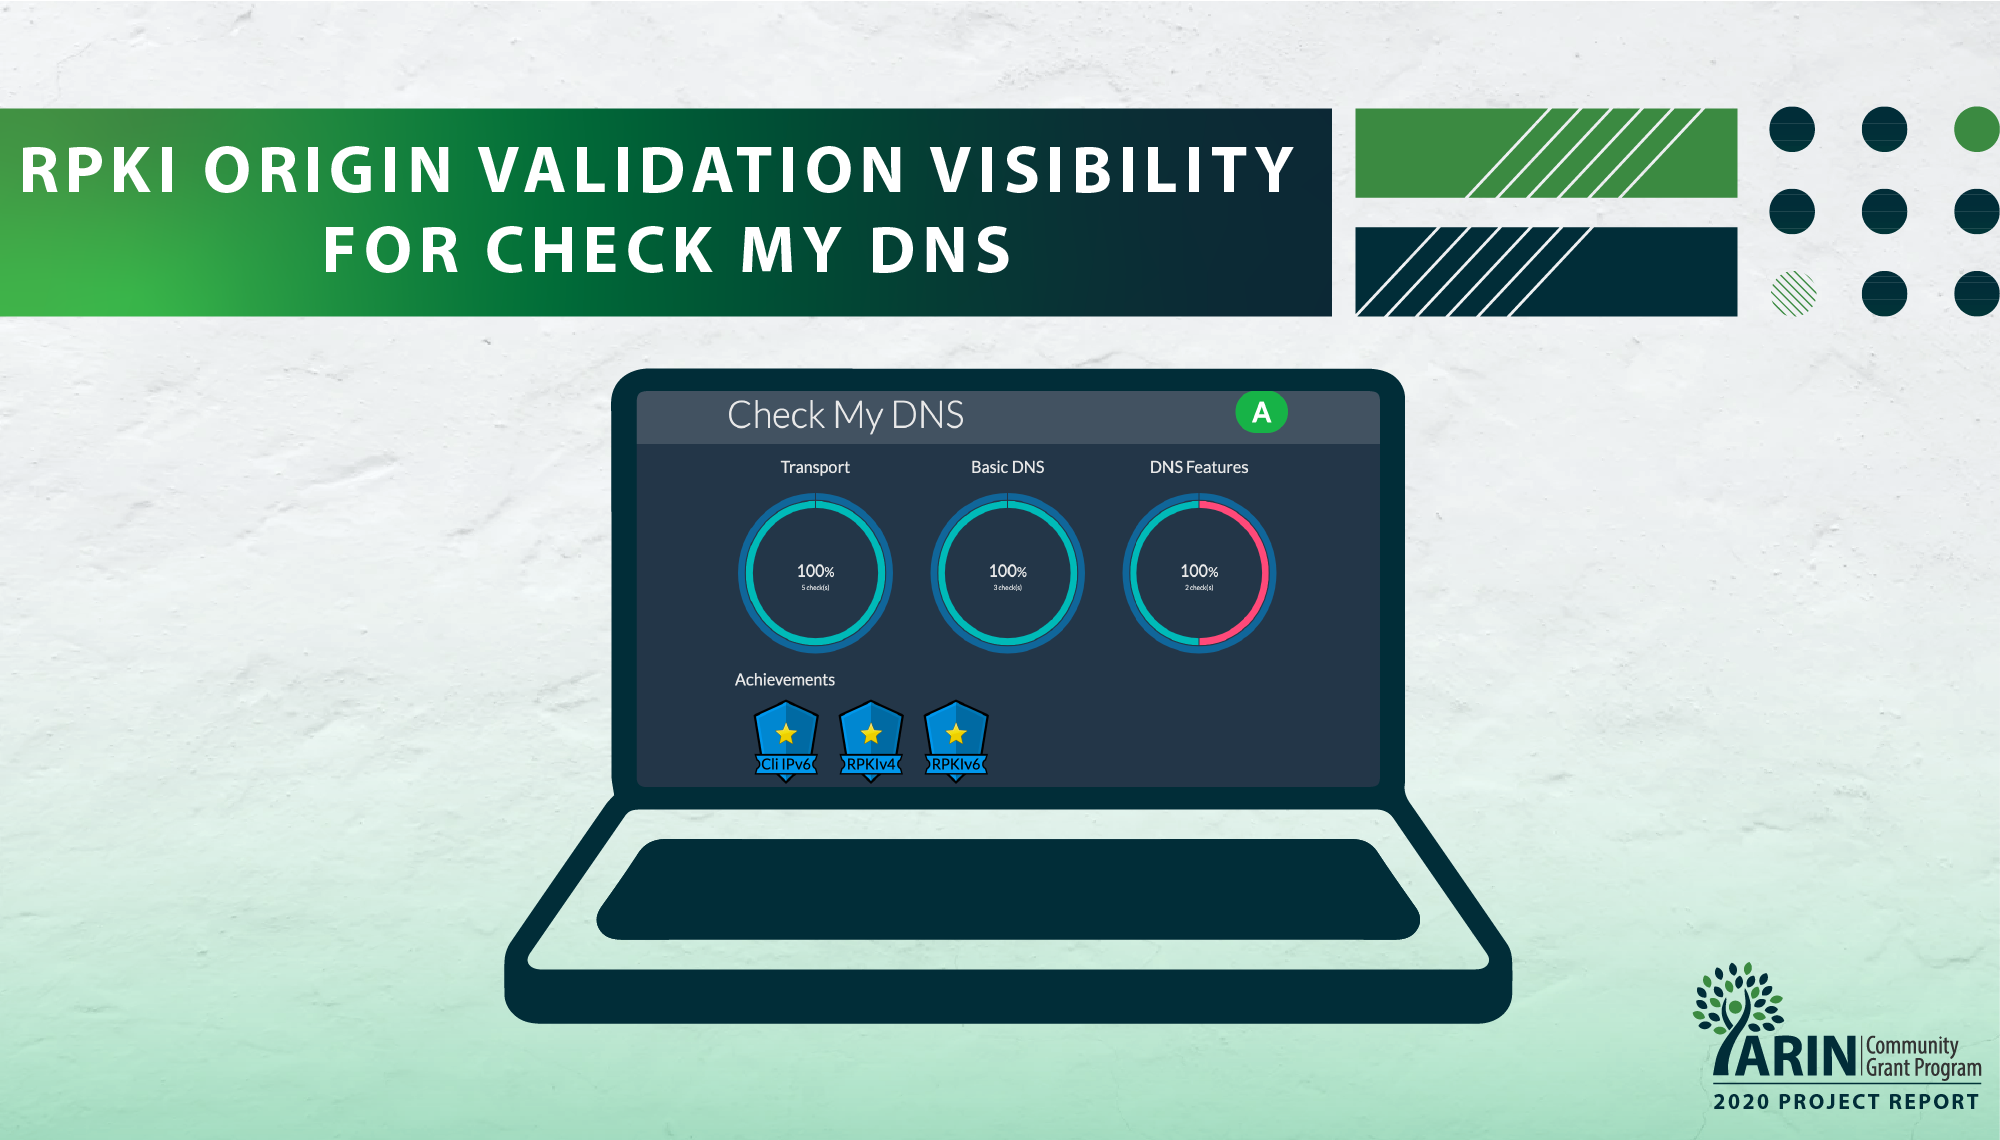 Read the blog RPKI Origin Validation Visibility for Check My DNS